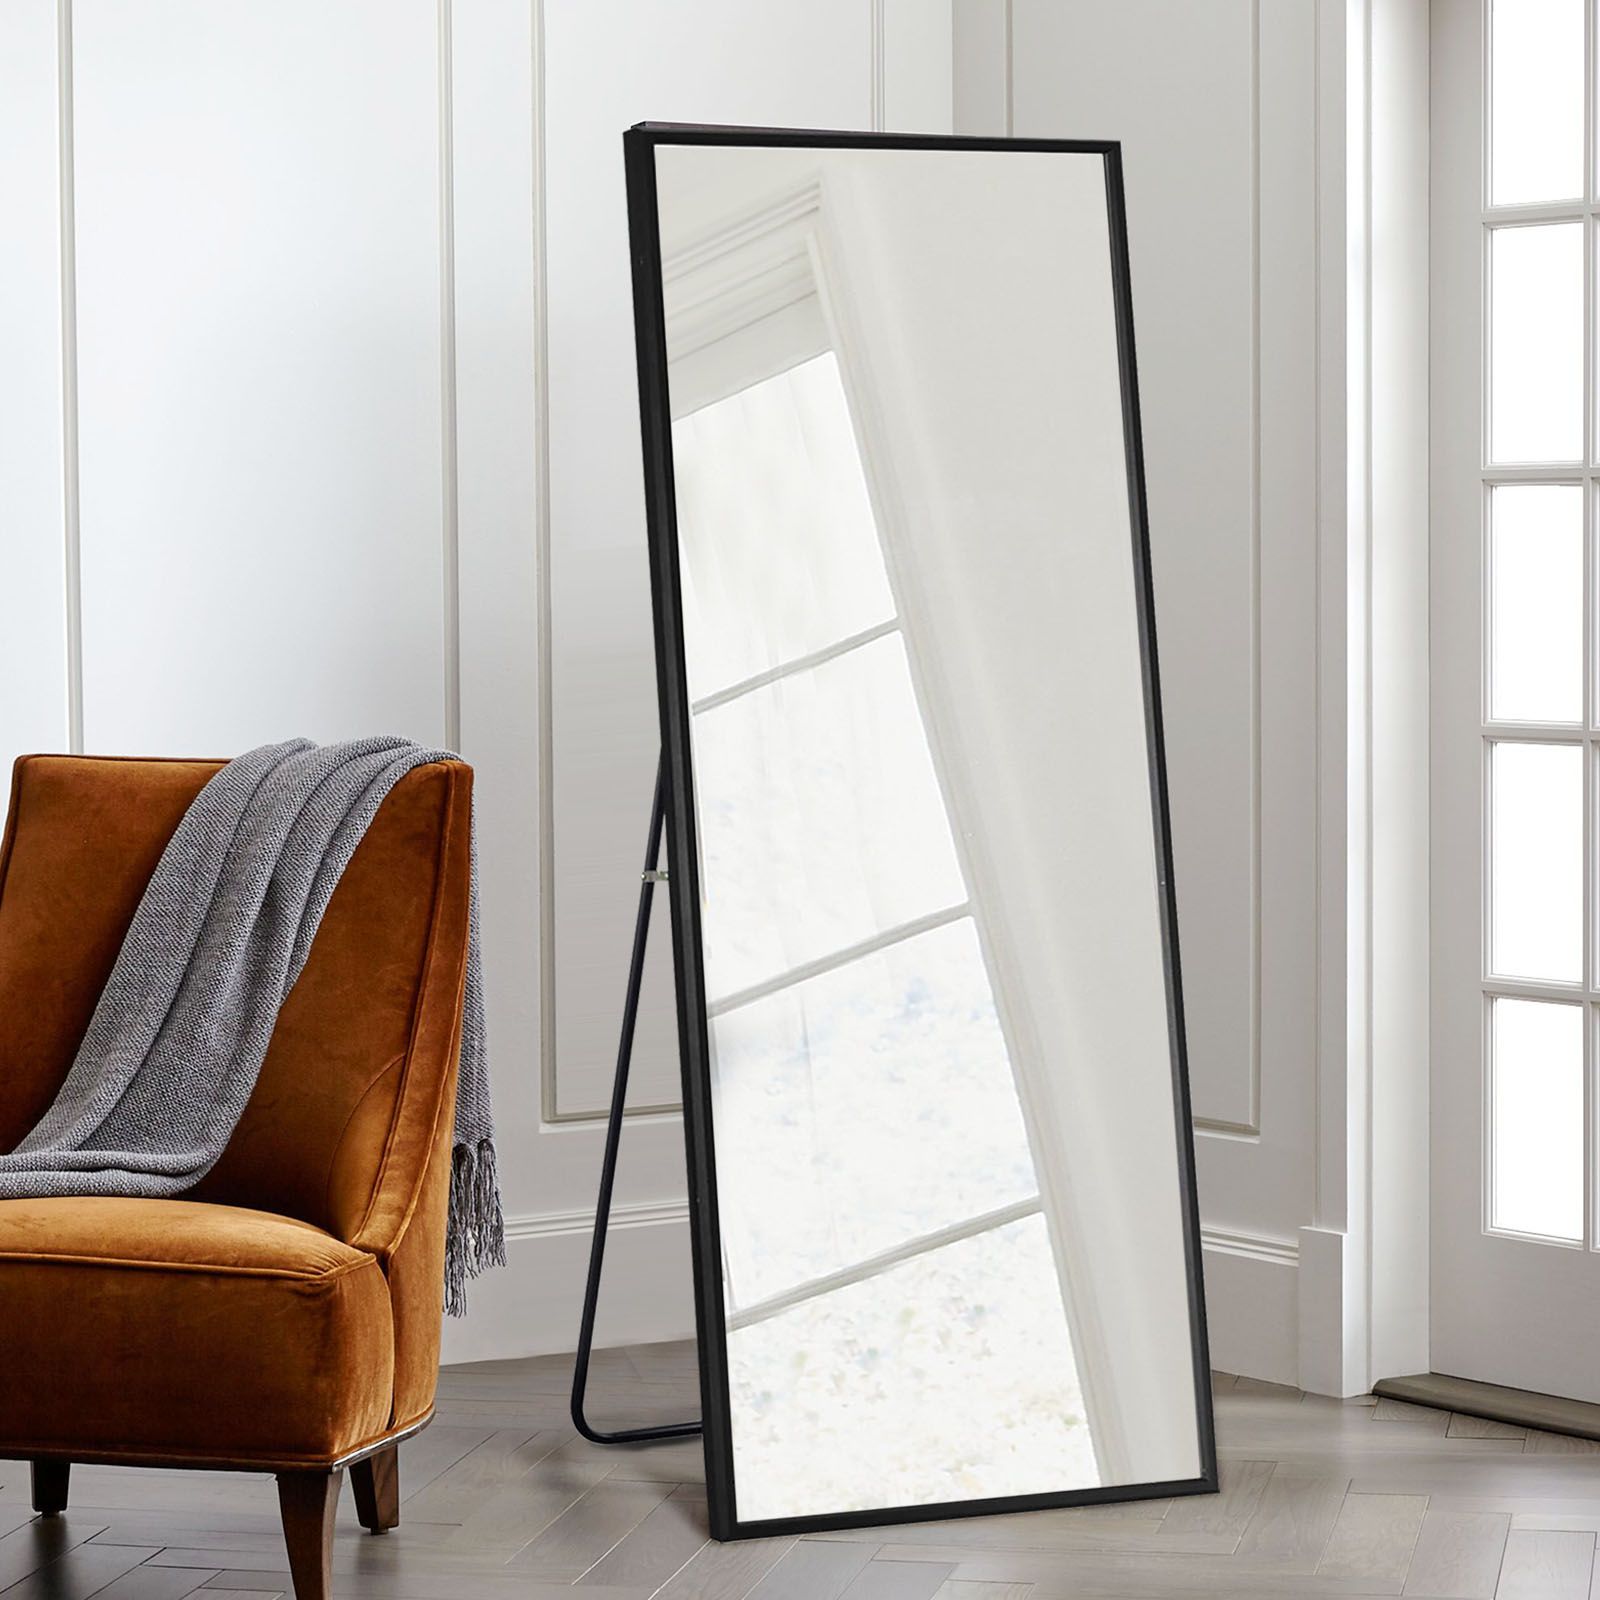 Neutype Full Length Mirror Floor Mirror With Stand Large Wall Mounted Intended For Square Oversized Wall Mirrors (View 2 of 15)